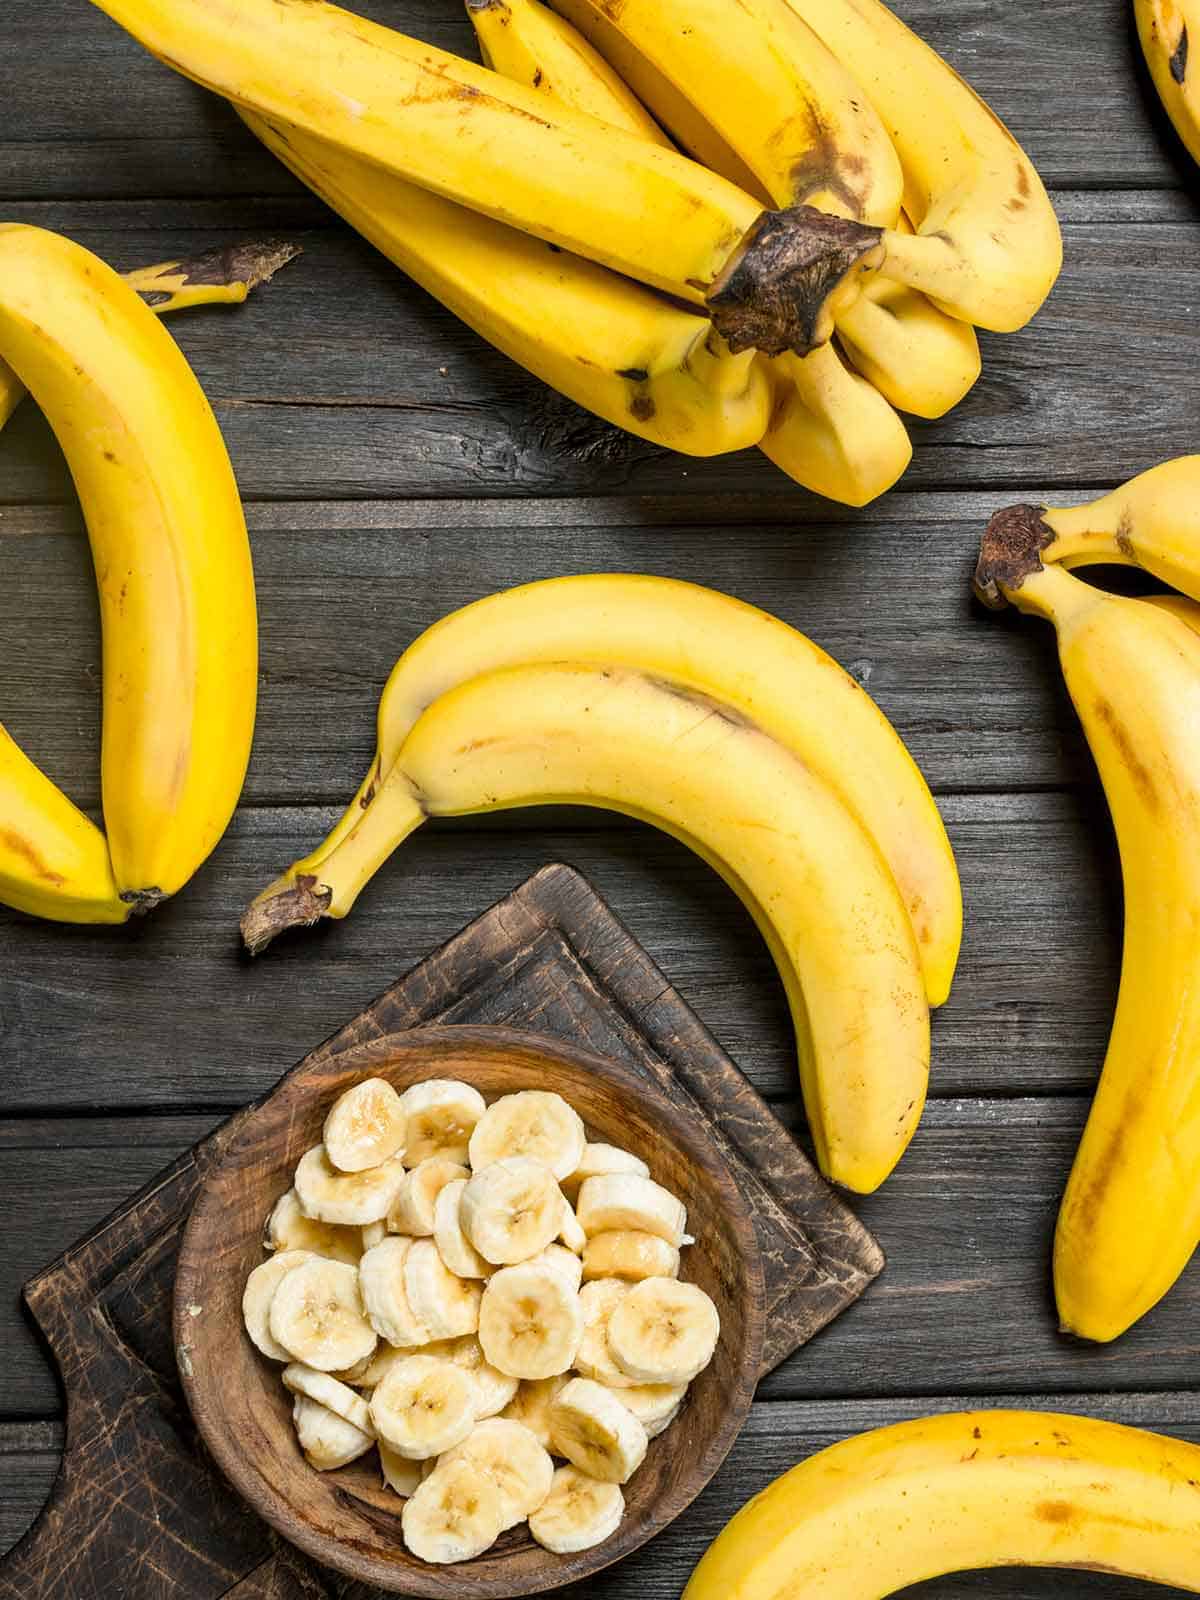 substitutes for a banana in any recipe